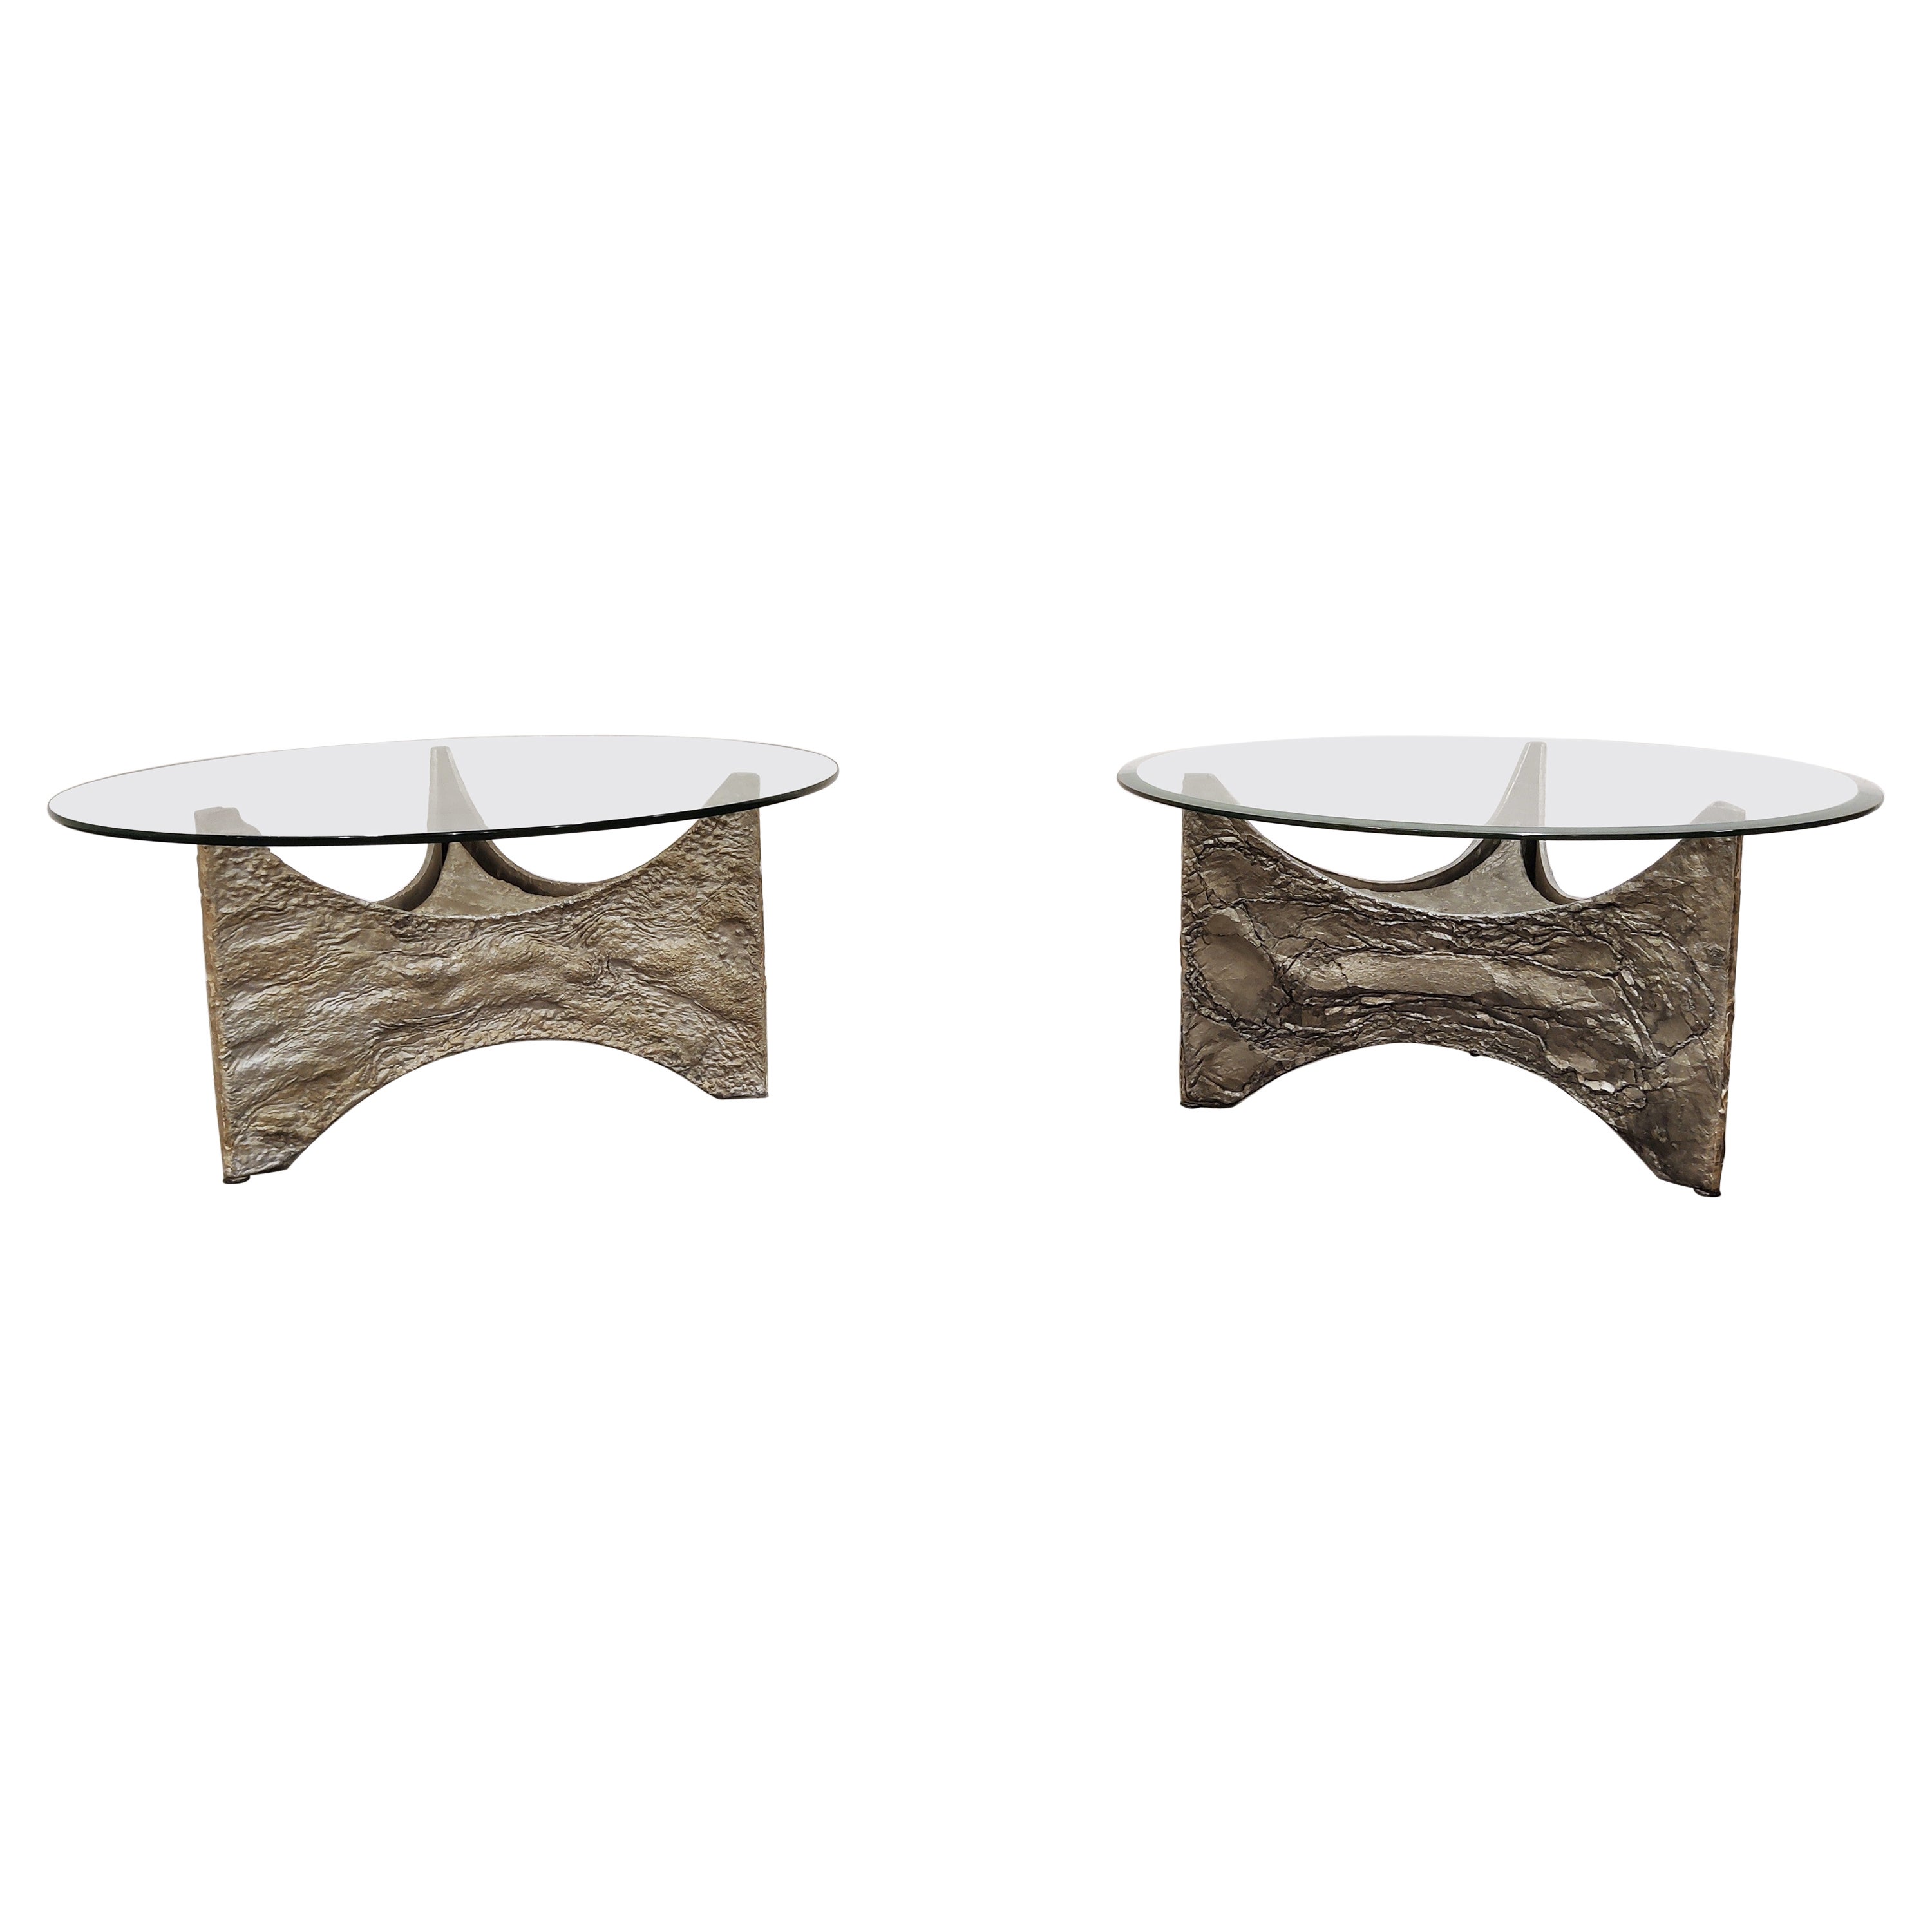 Illuminated Brutalist Coffee Tables, Set of 2, 1970s For Sale